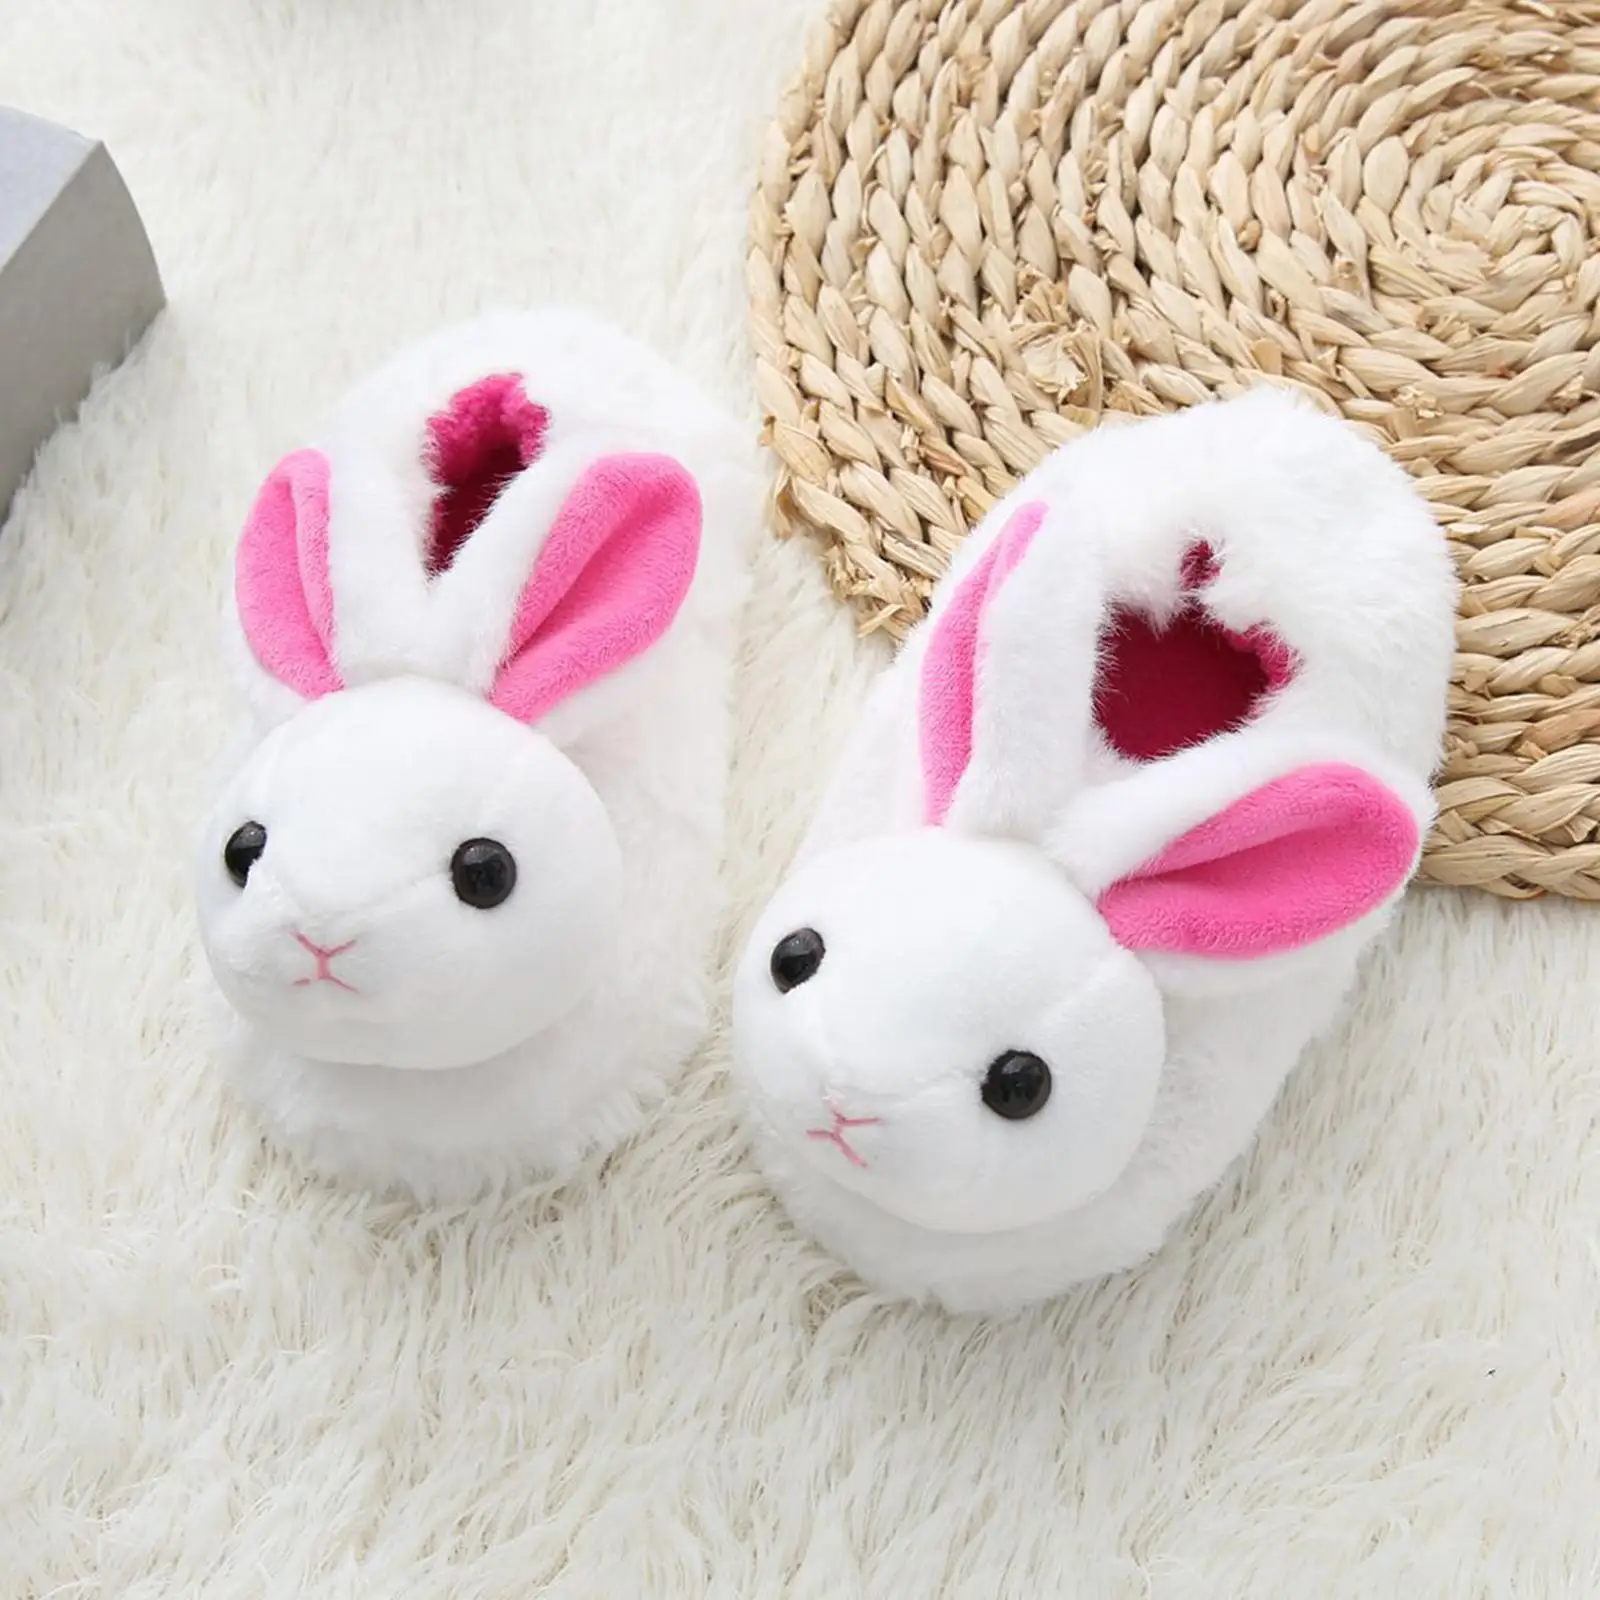 Rabbit Plush Slippers Winter Slippers Soft Indoor House Slippers for Toddlers